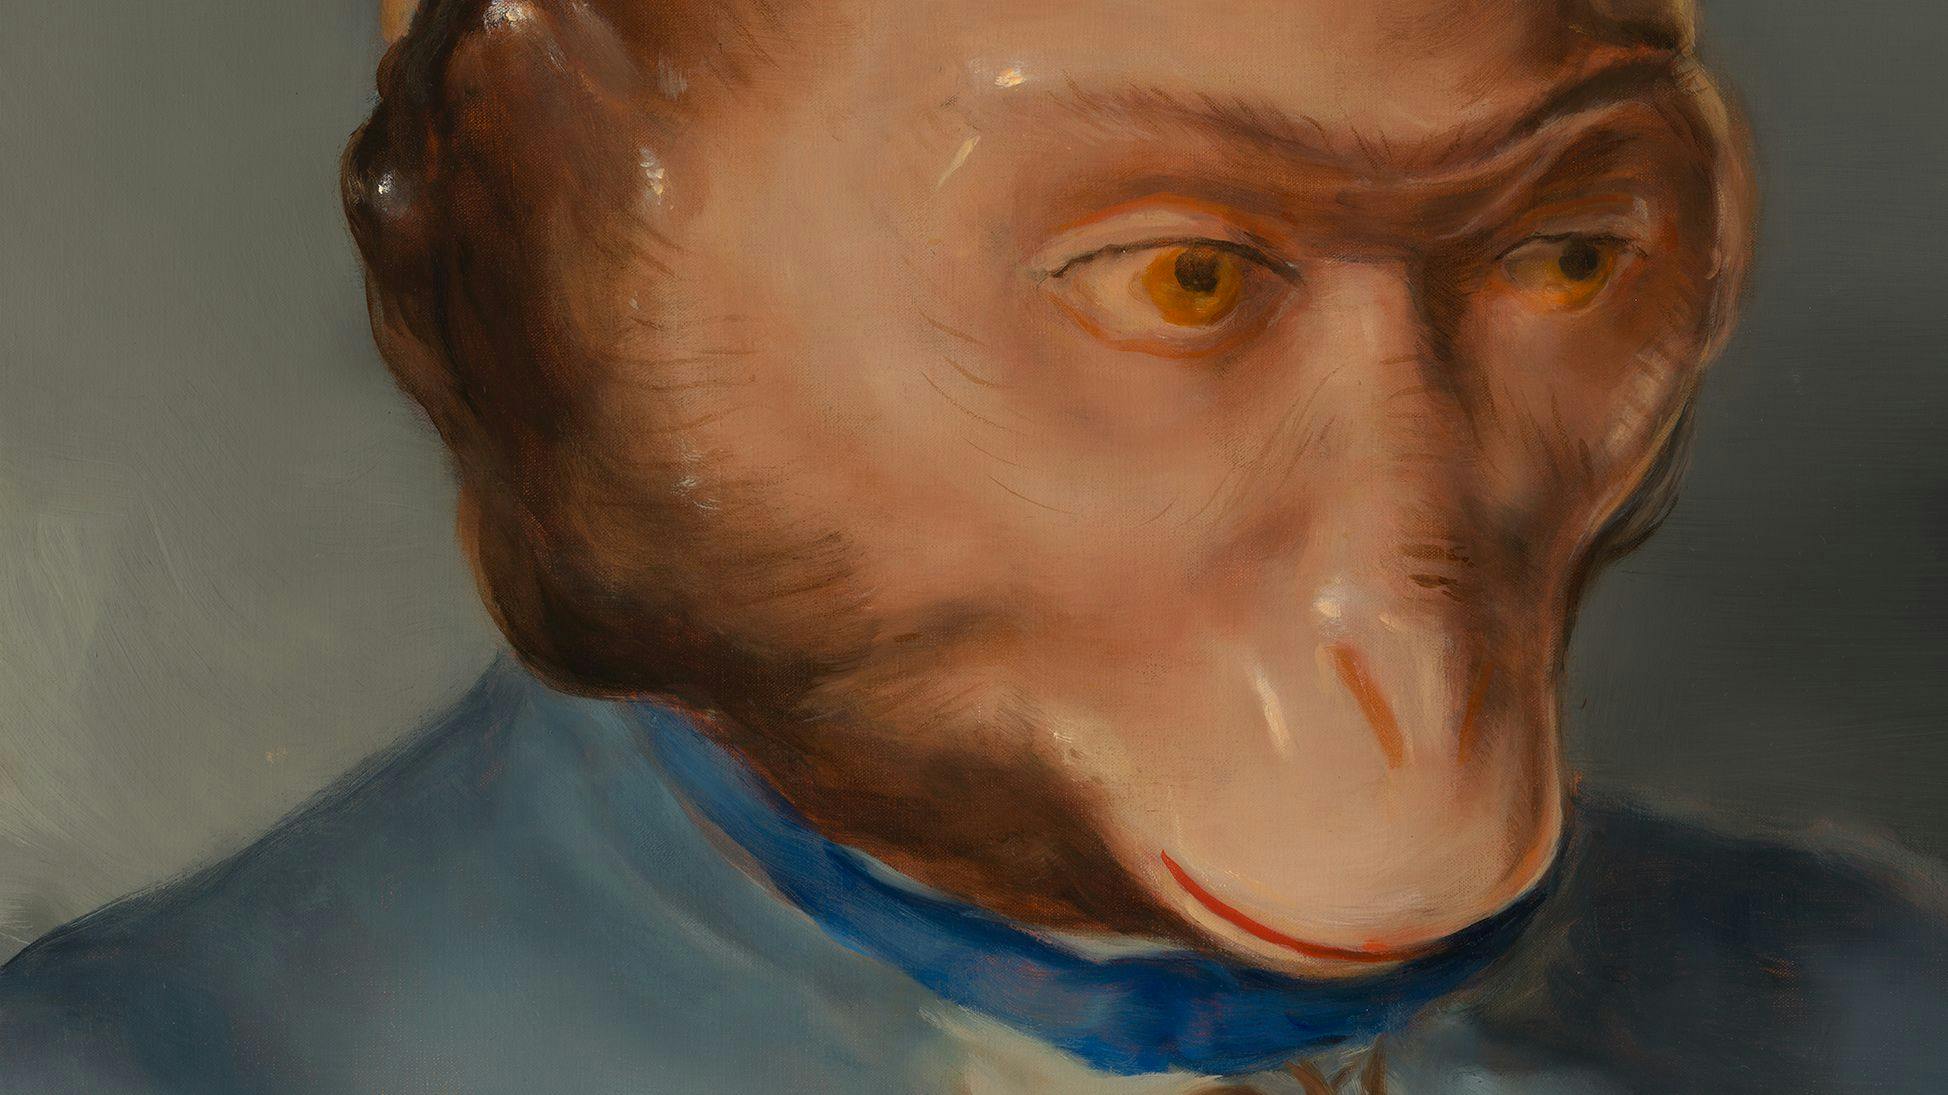 A detail of an artwork by Michael Borremans titled the Monkey dated 2023